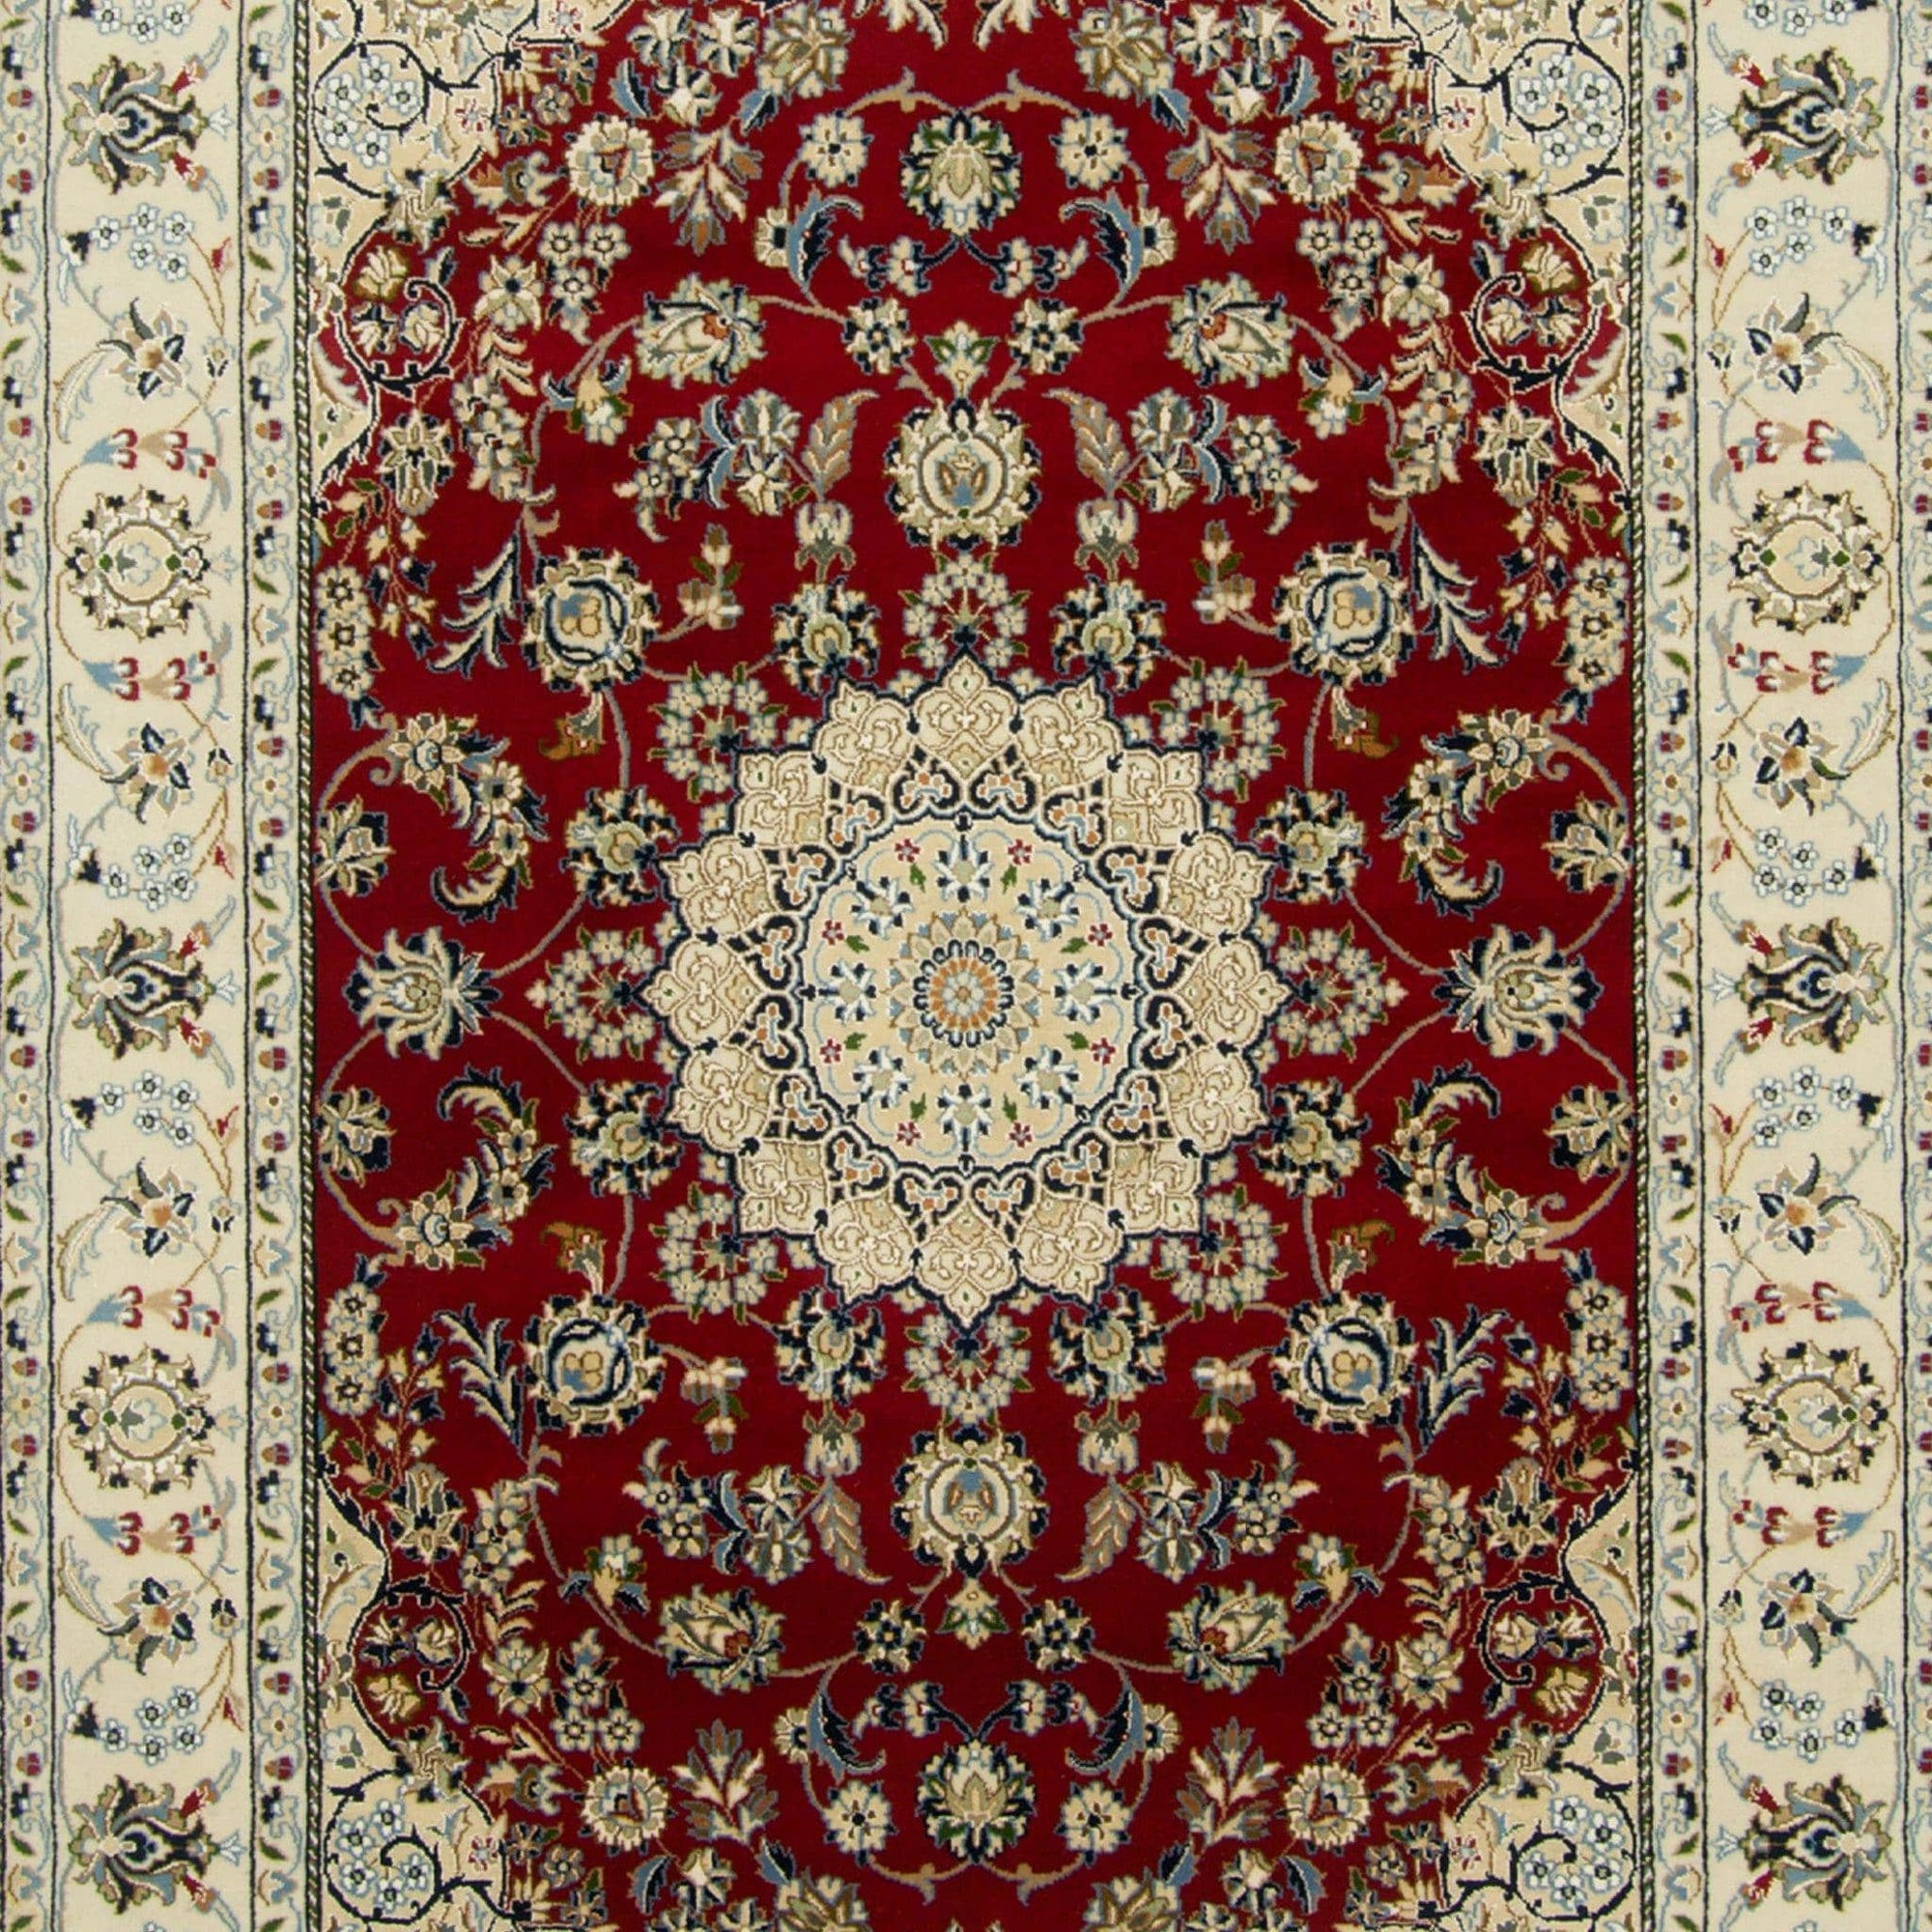 Fine Hand-knotted Wool & Silk Nain Rug 173cm x 249cm